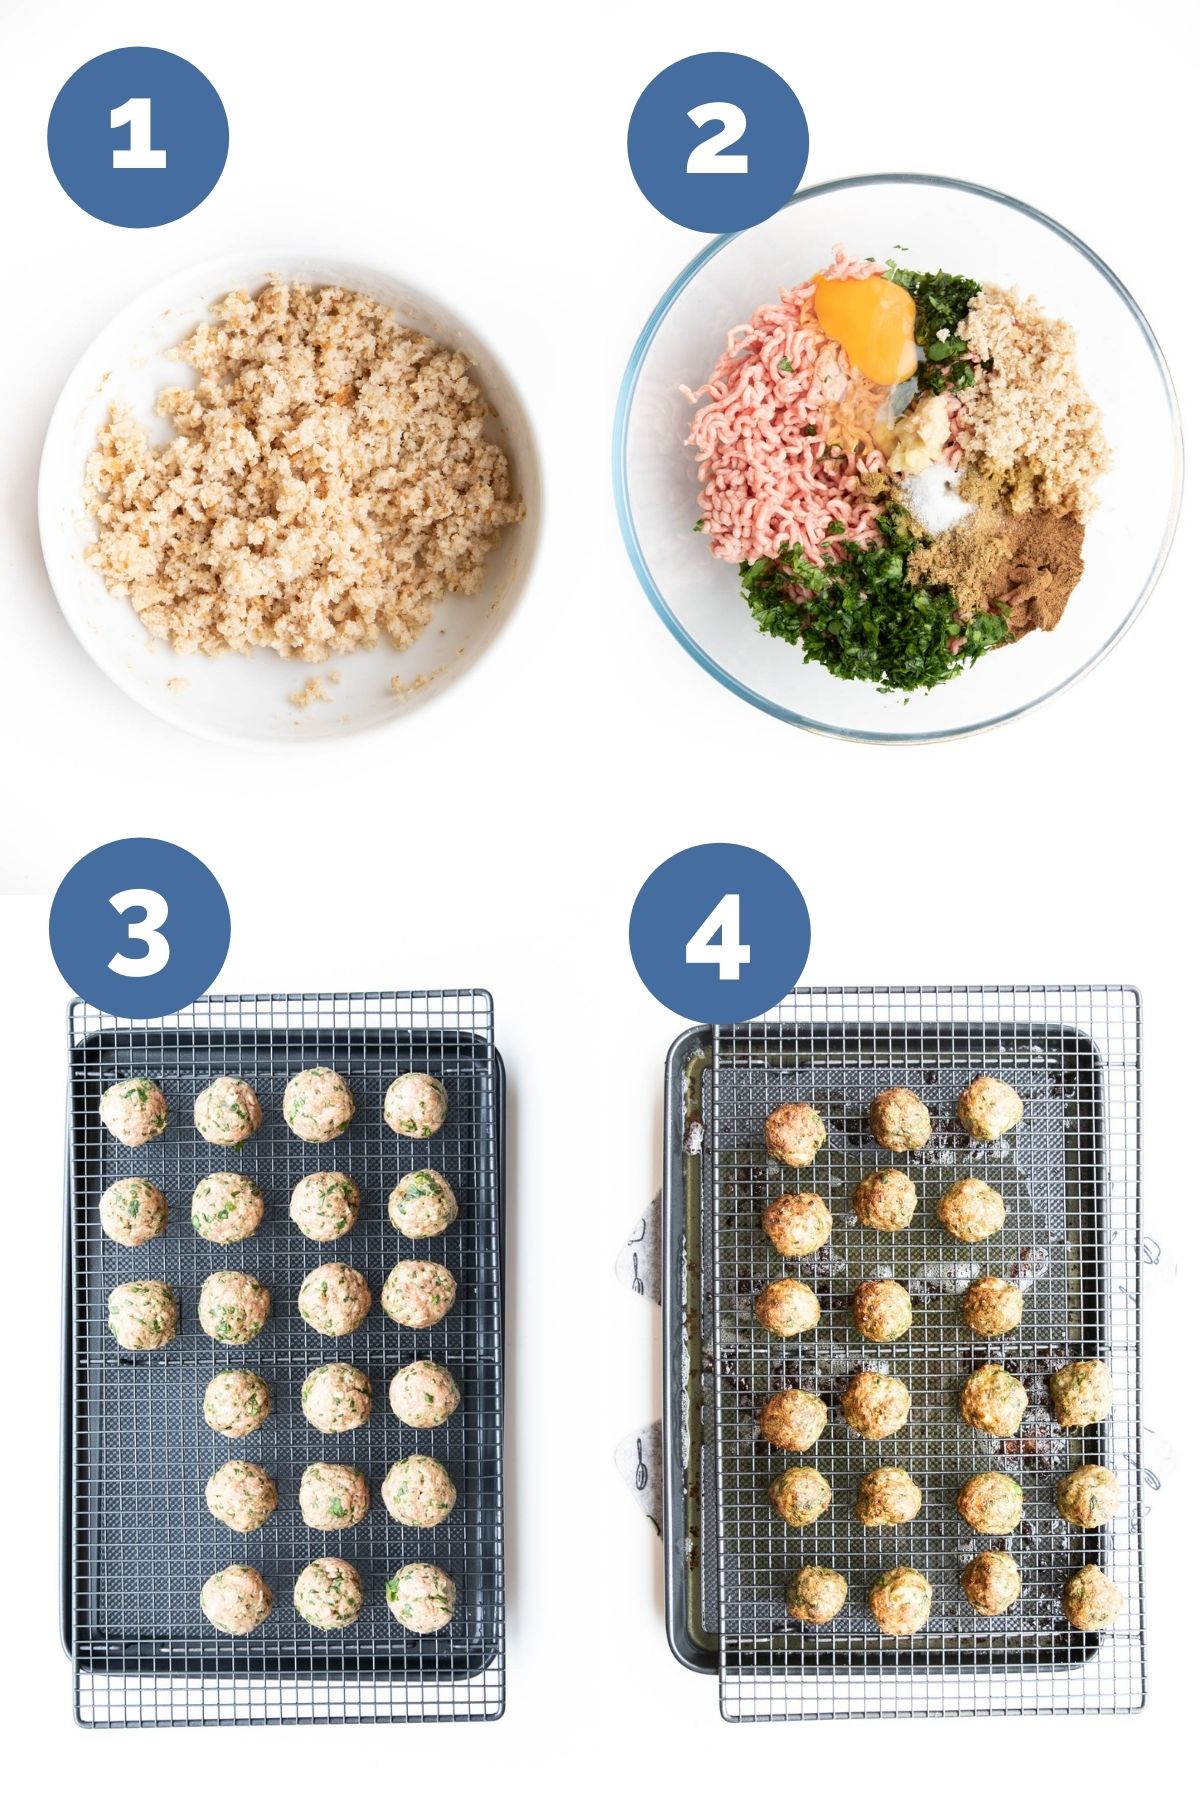 Collage of 4 Images Showing How to Make Spice Meatballs 1) Soaking Breadcrumbs in Milk 2) All Ingredients in Mixing Bowl 3)Raw Meatballs on Tray 4)Cooked Meatballs on Tray.